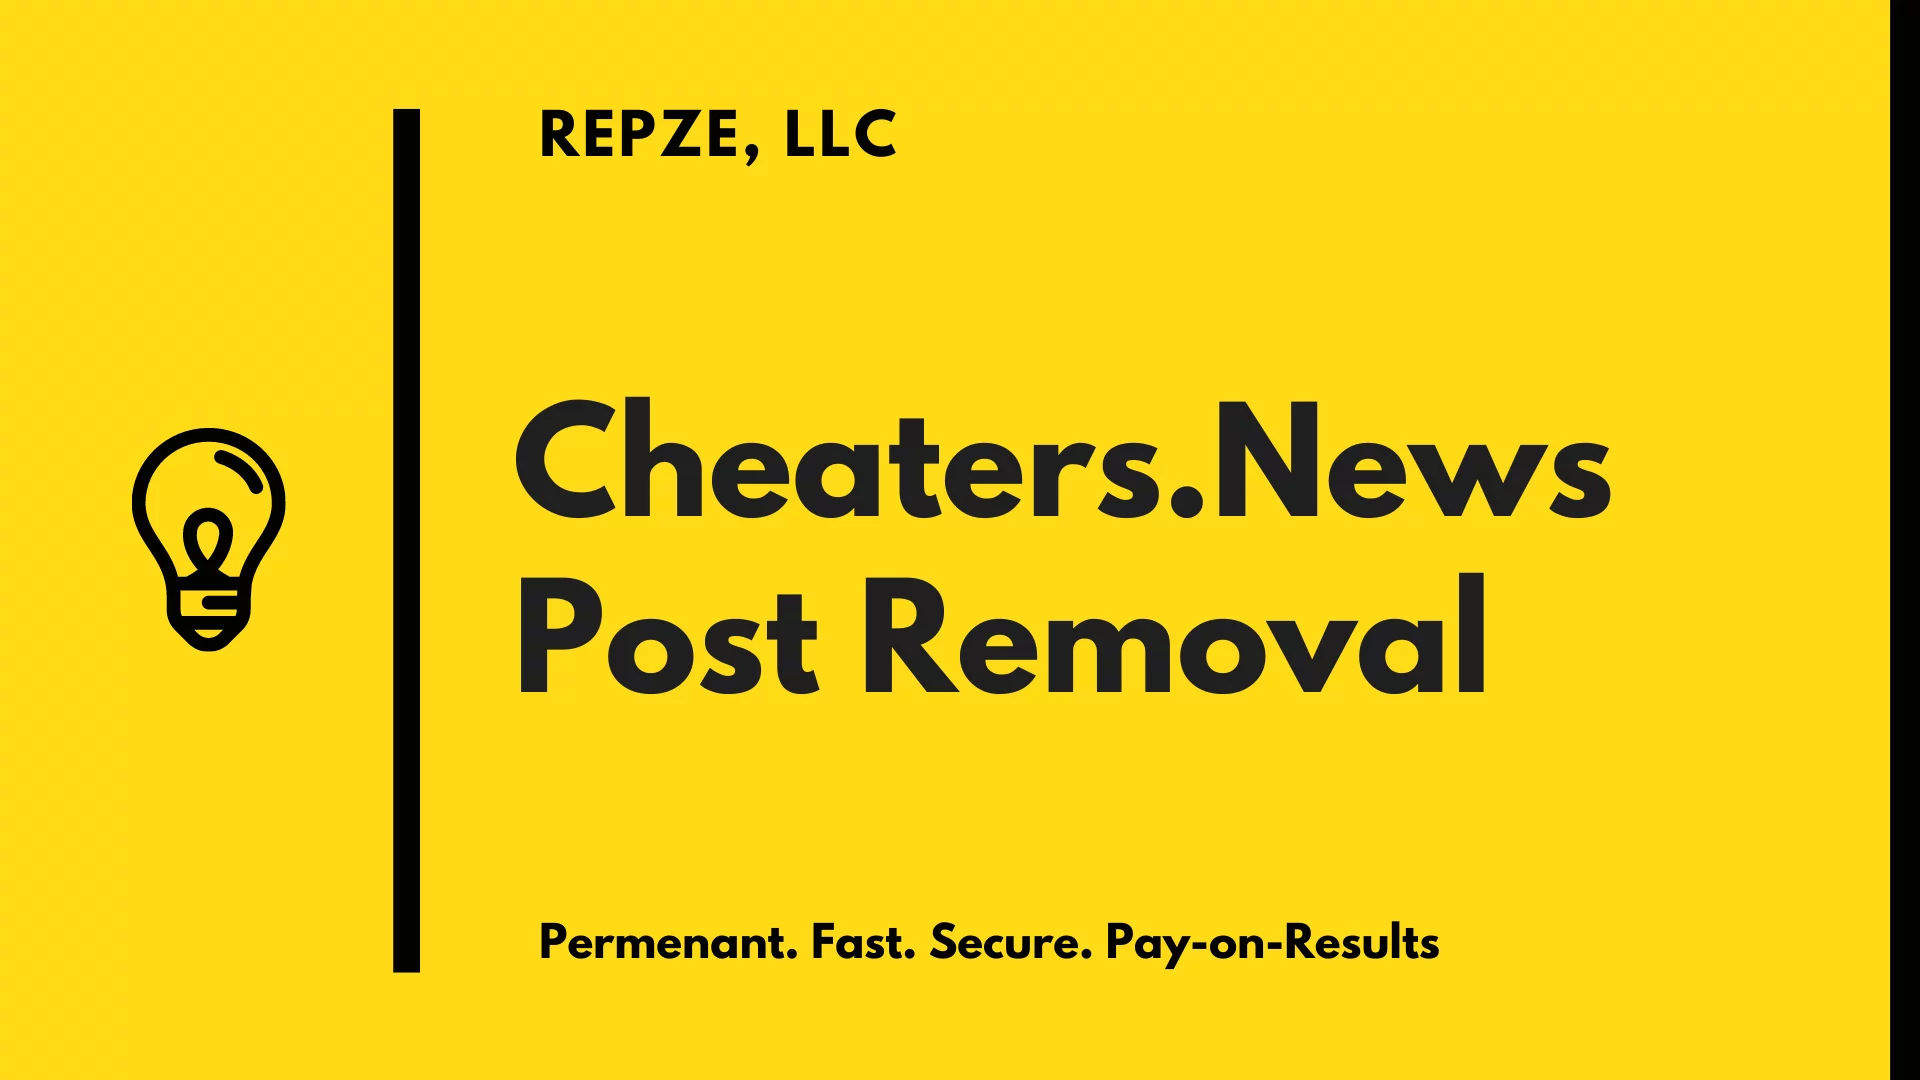 Cheaters.news Post Removal